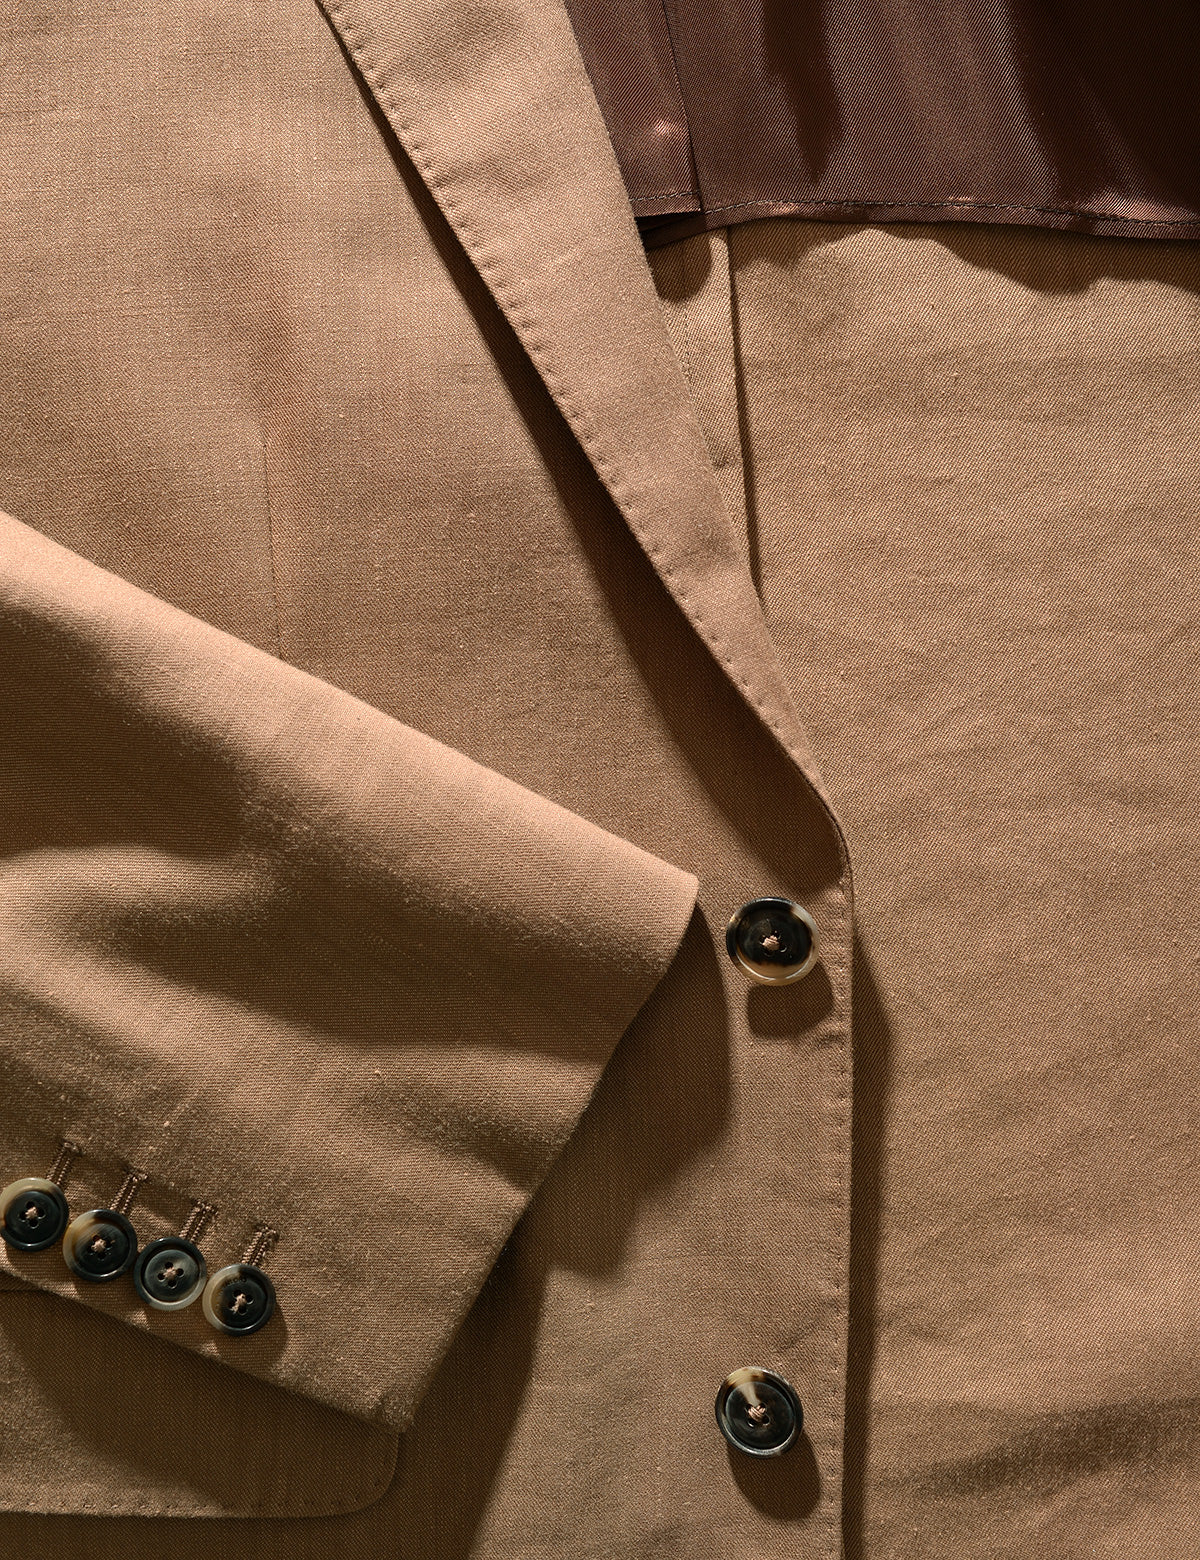 Detail shot of Brooklyn Tailors BKT50 Tailored Jacket in Wool Linen - Sahara showing cuff, lapel, and buttons